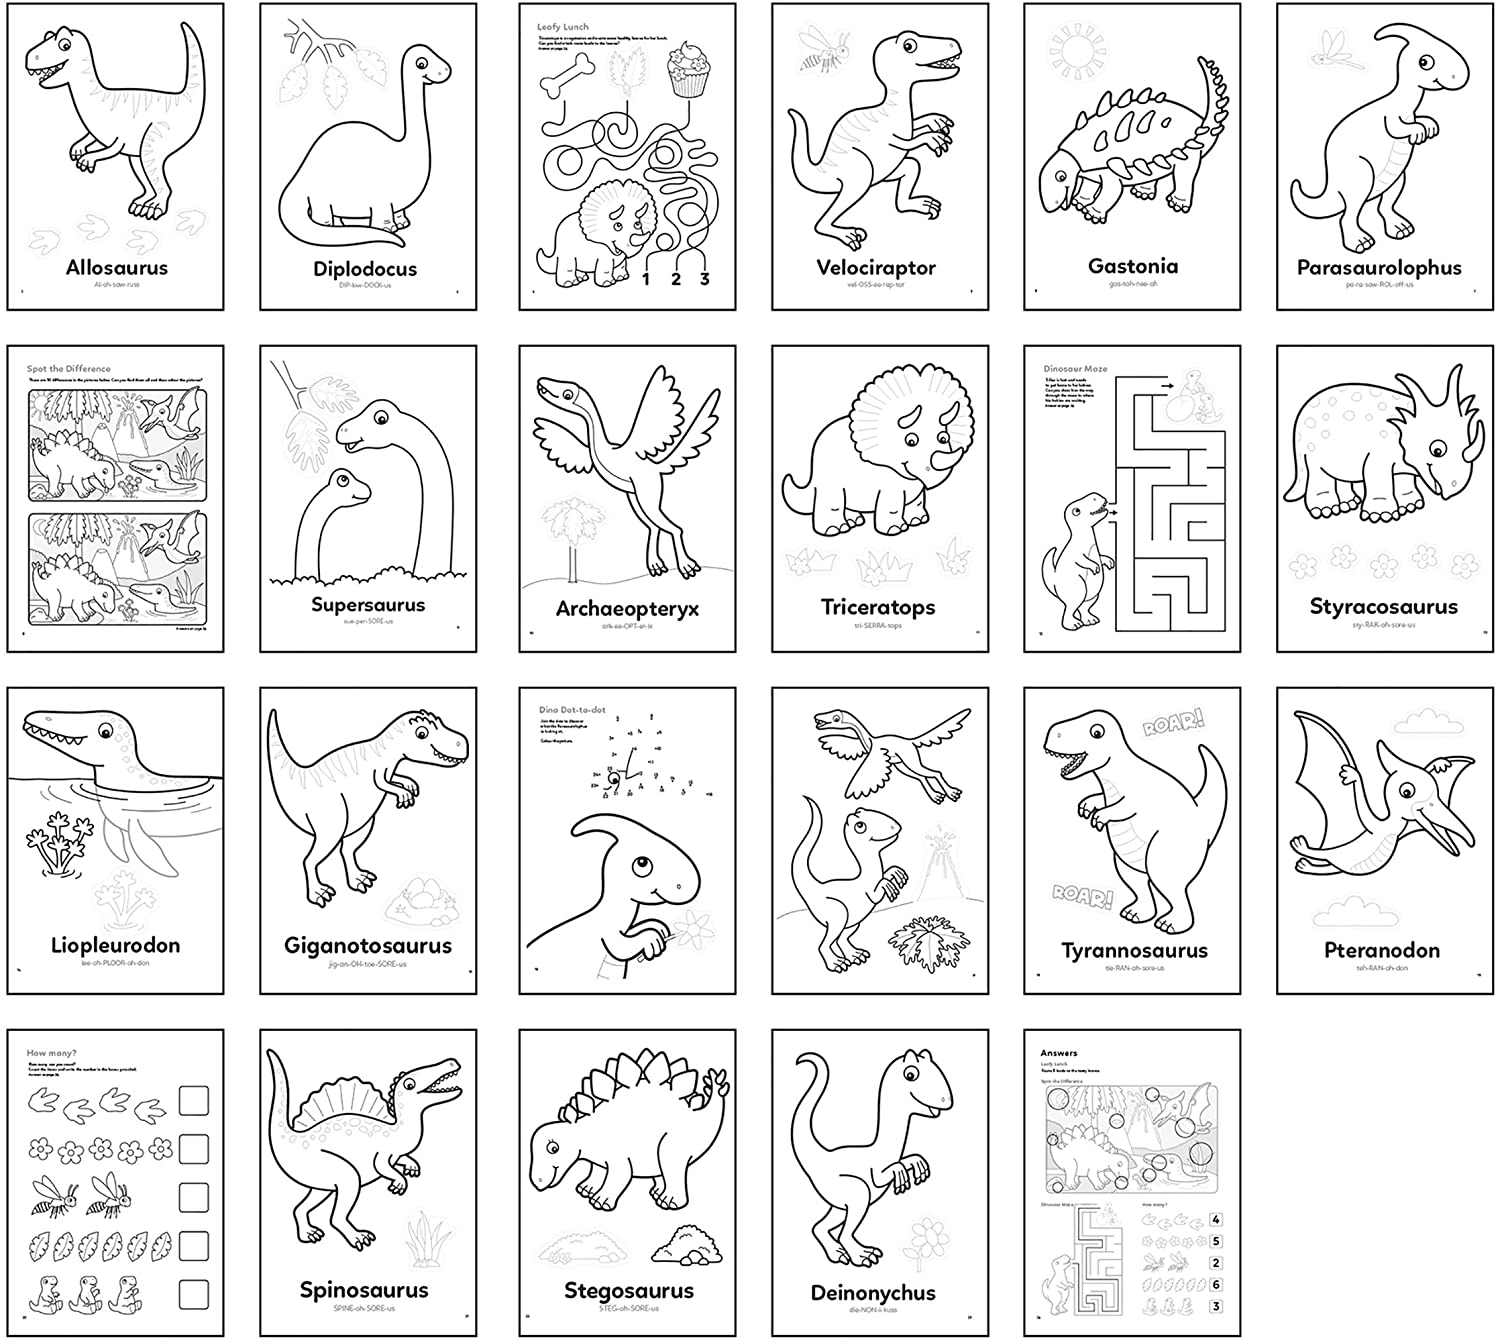 Orchard Toys Dinosaurs Colouring & Sticker Book A jampacked 24-page dinosaur-themed colouring book with stickers. Suitable for children aged 3 years +